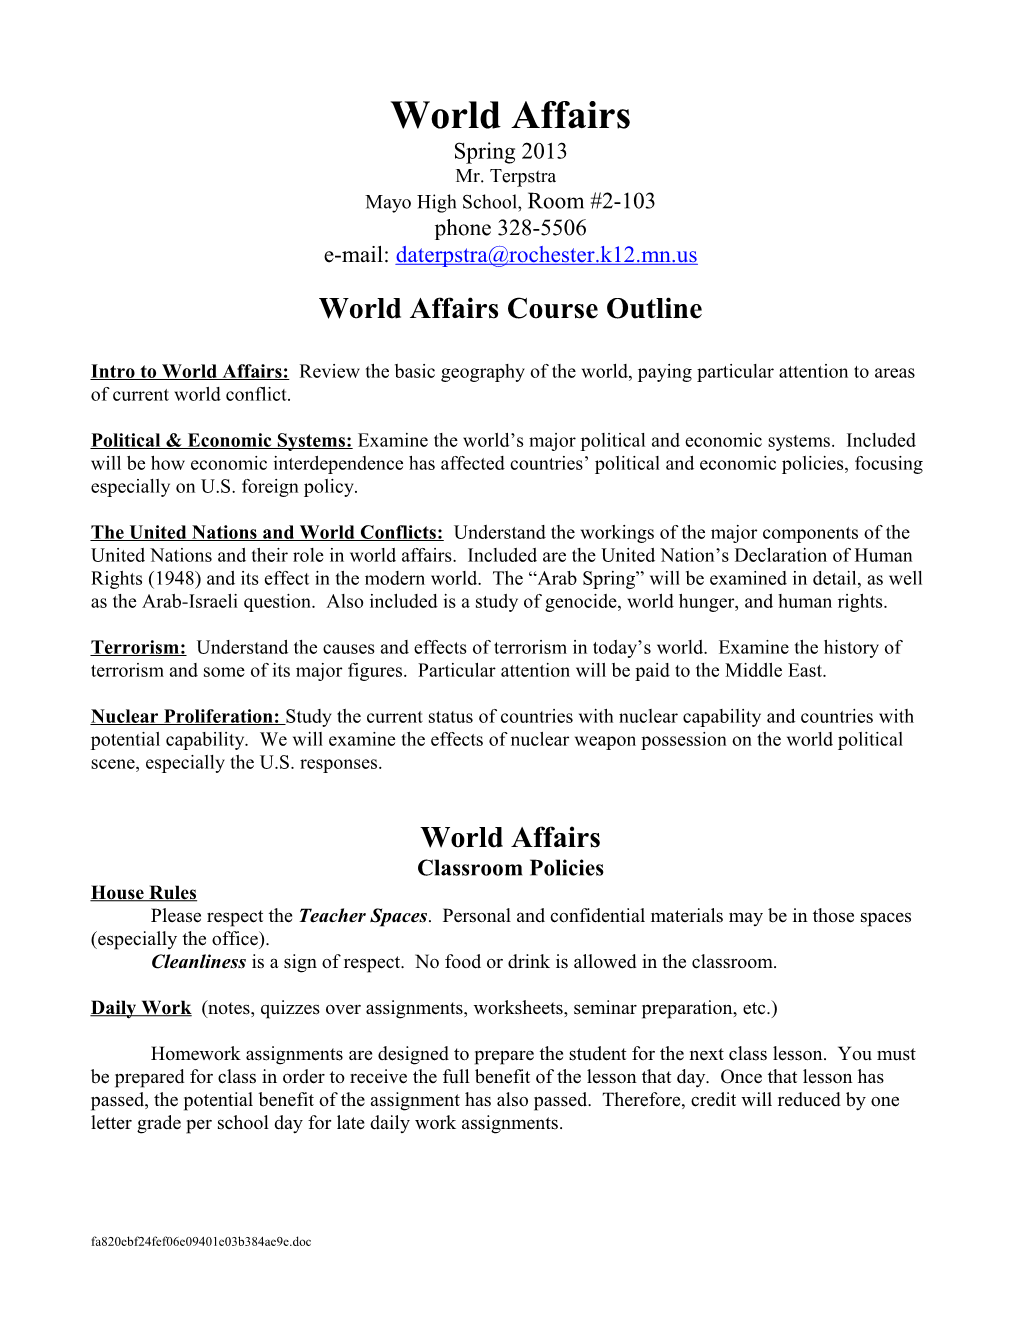 World Affairs Course Outline